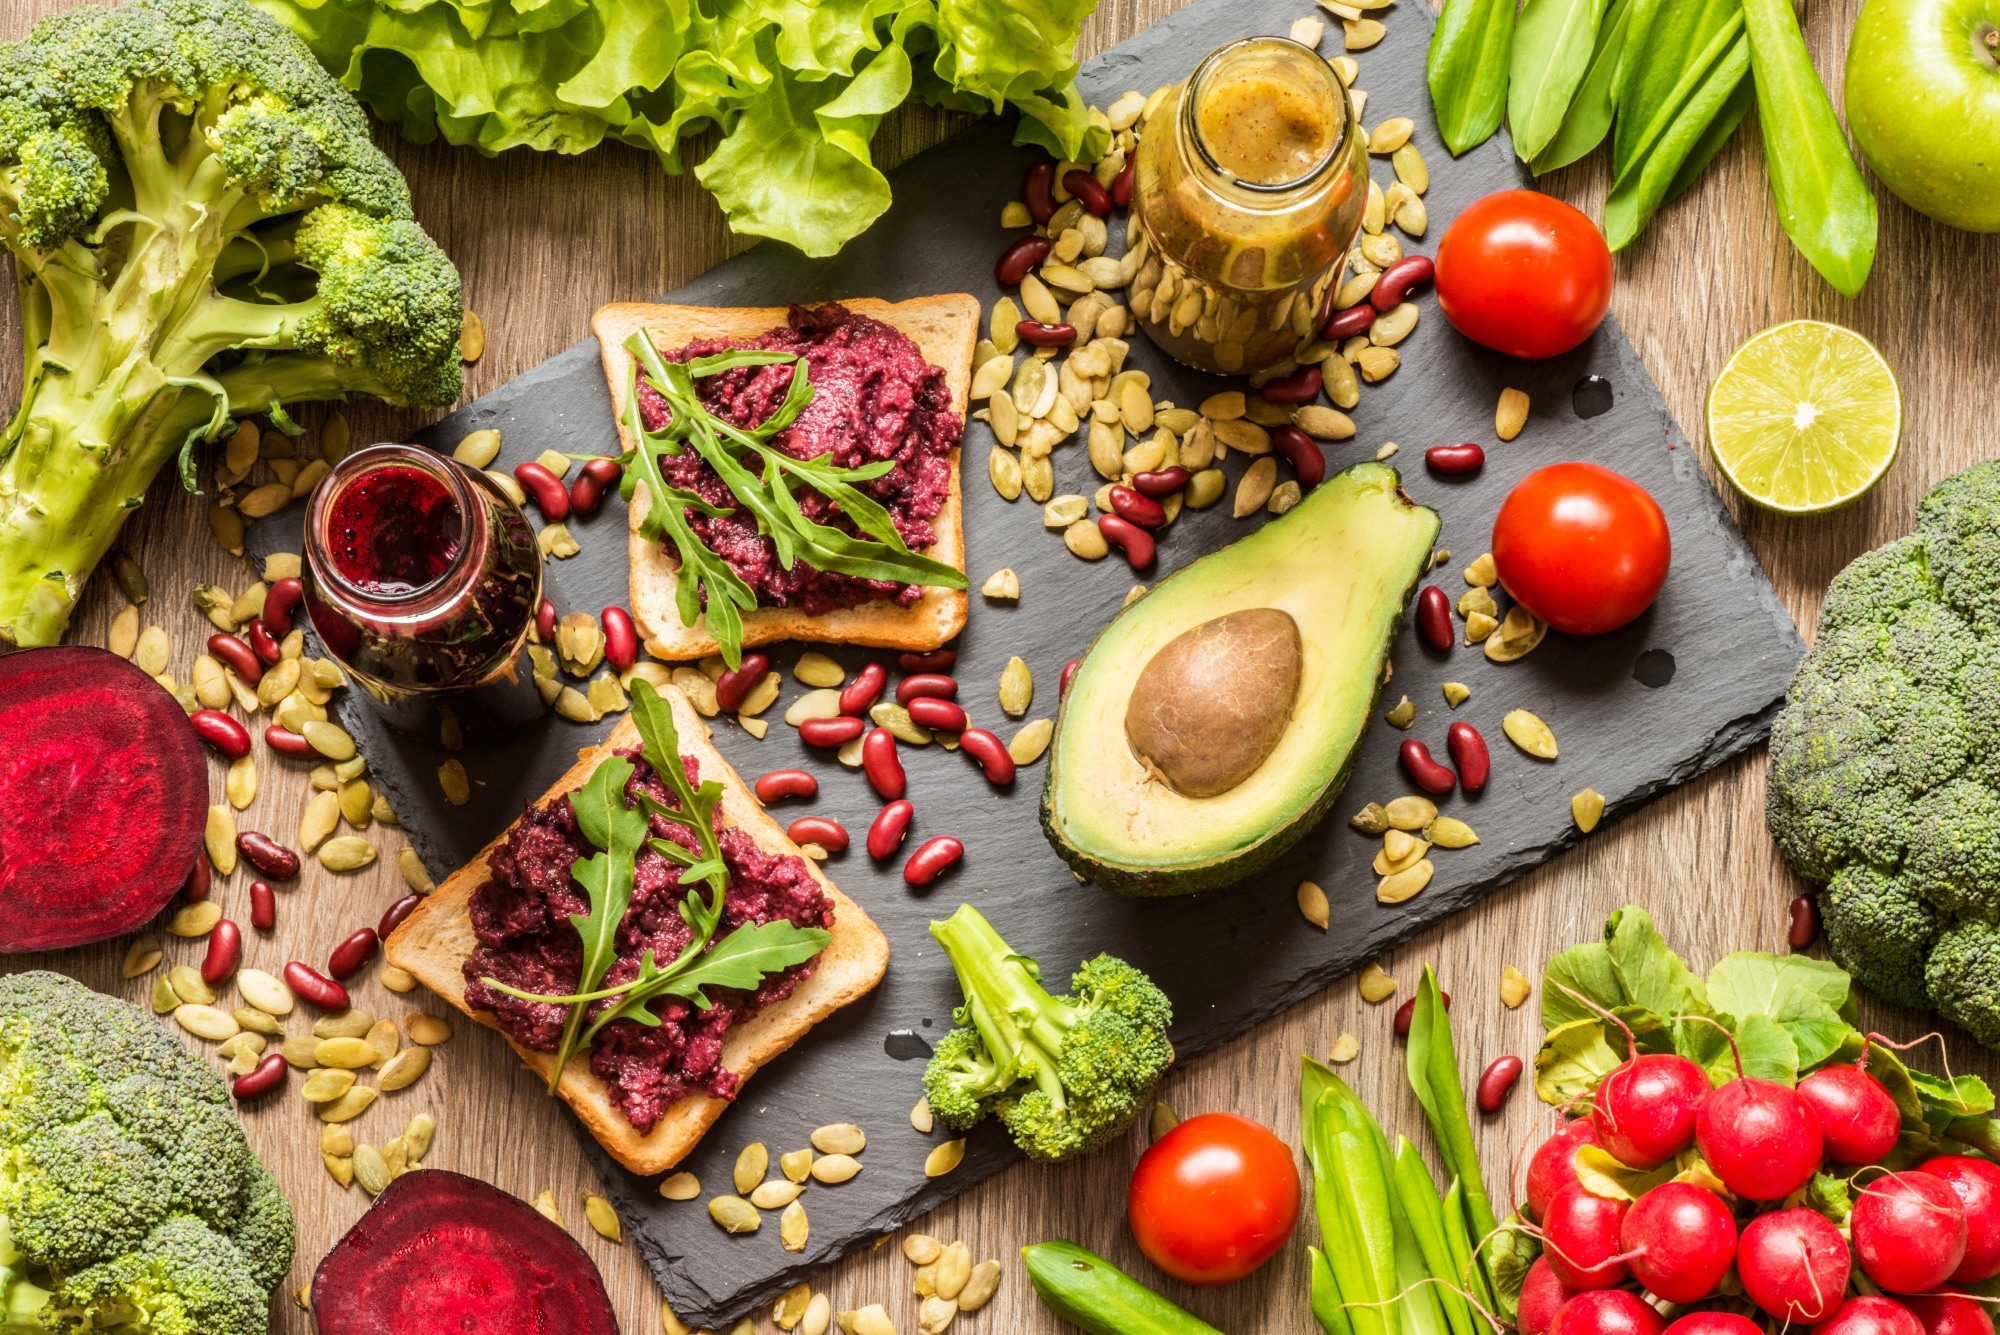 Study: Vegan Diets for Children: A Narrative Review of Position Papers Published by Relevant Associations. Image Credit: RONEDYA/Shutterstock.com